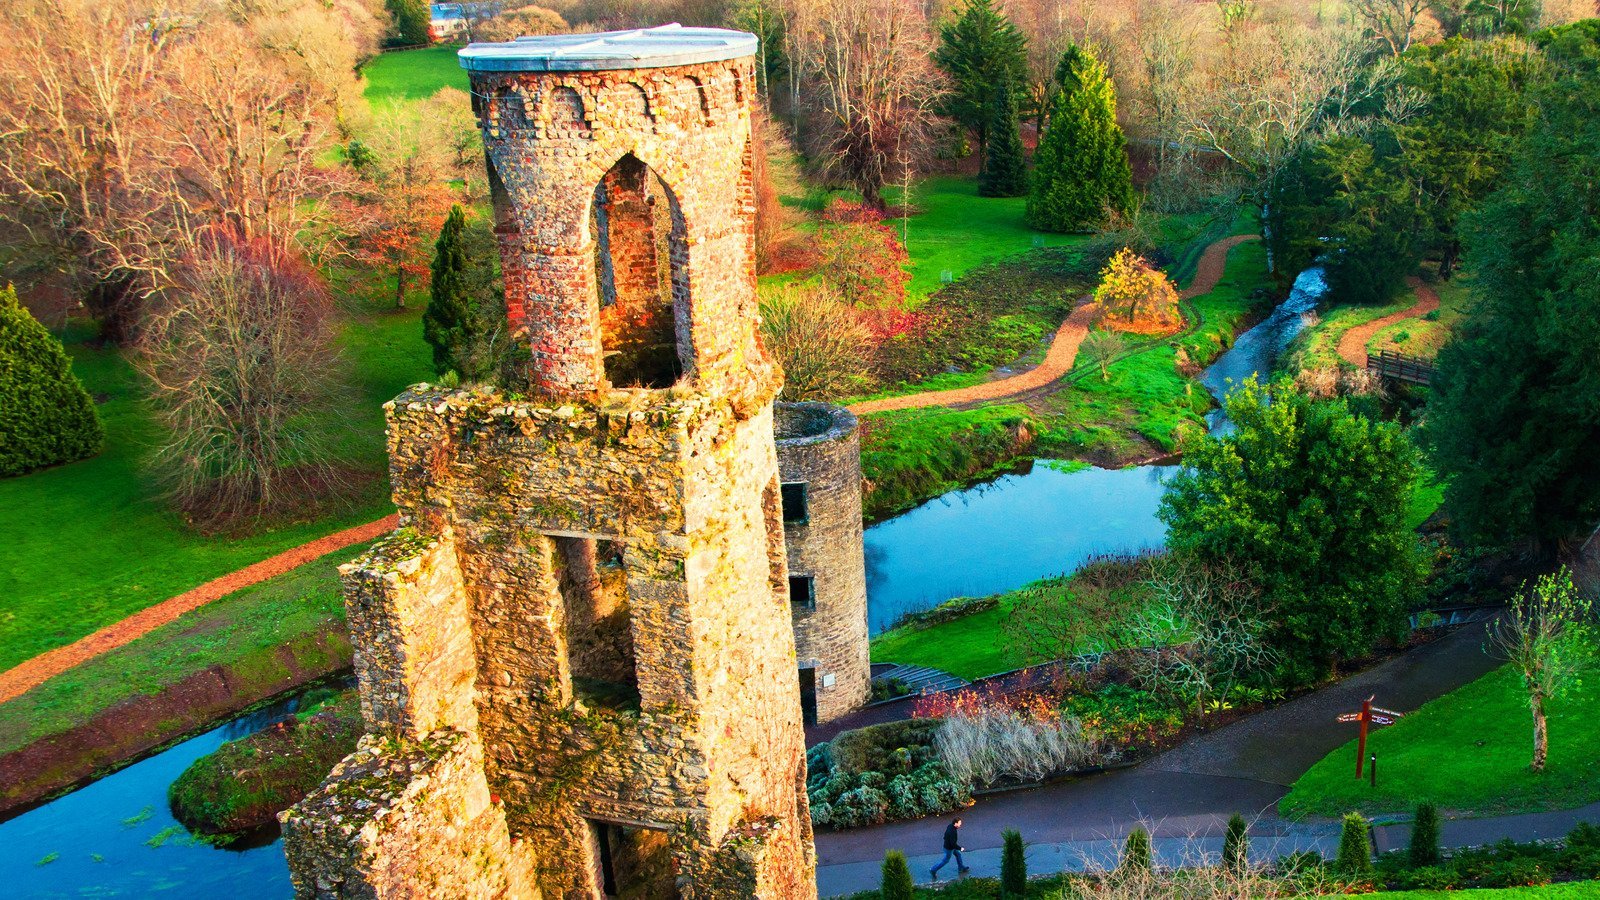 What You Need To Know Before Visiting The Legendary Blarney Stone In Ireland